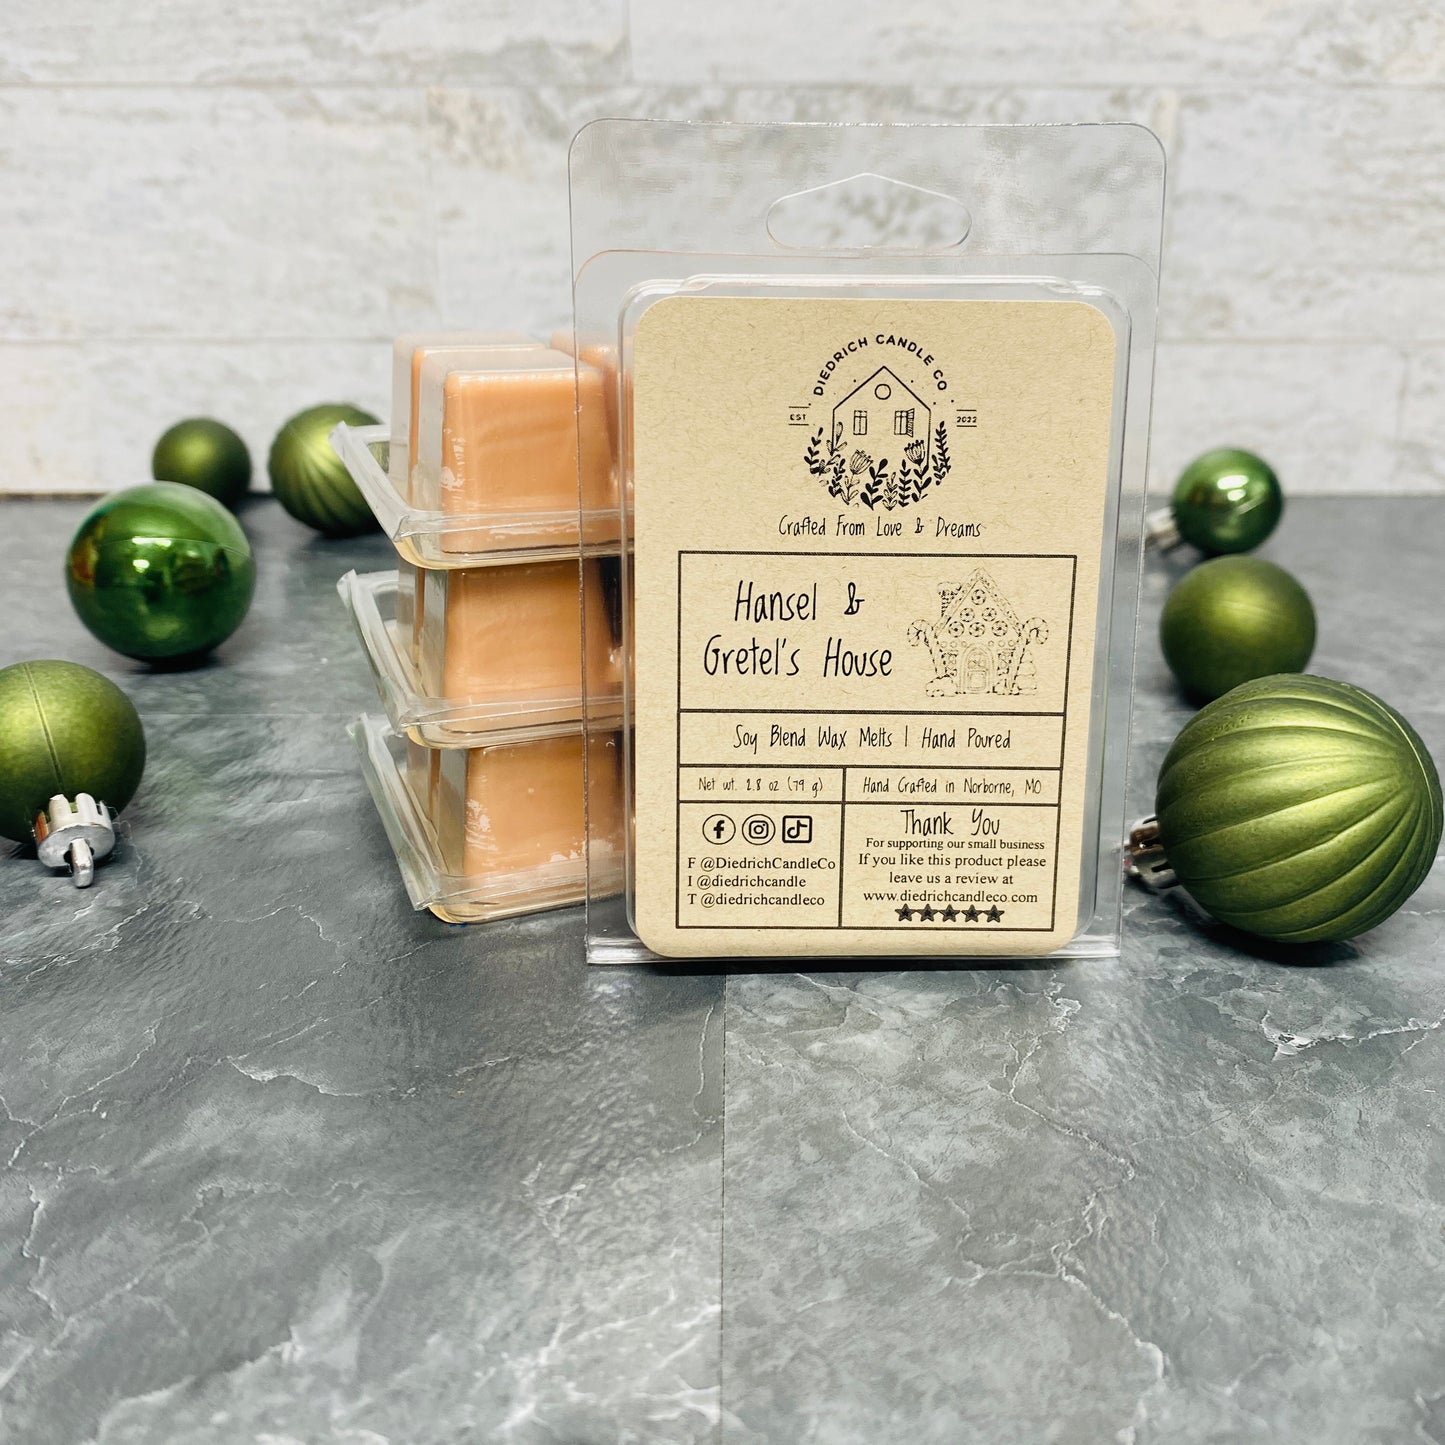 Hansel & Gretel's House | Hand Poured Scented Soy Wax Melt